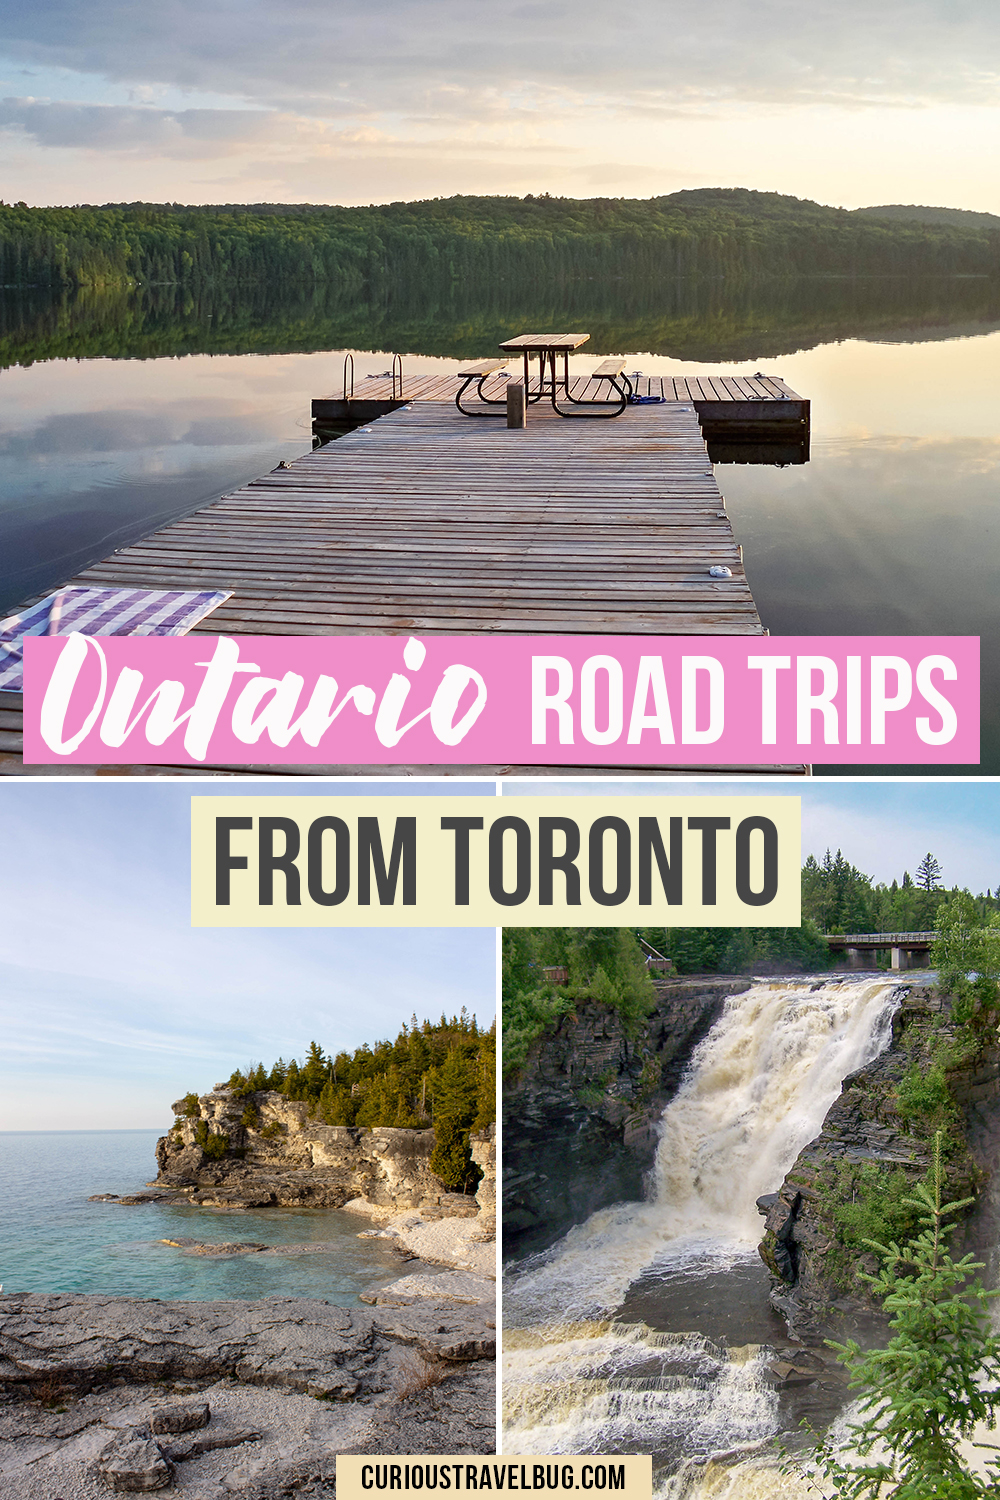 Ontario road trips you can take from Toronto. All the best Ontario weekend road trips and options for longer vacations including week long road trips. The best natural attractions in Ontario as well as the cutest towns and charming cities and cultural experiences such as wine tasting and checking out historic buildings.